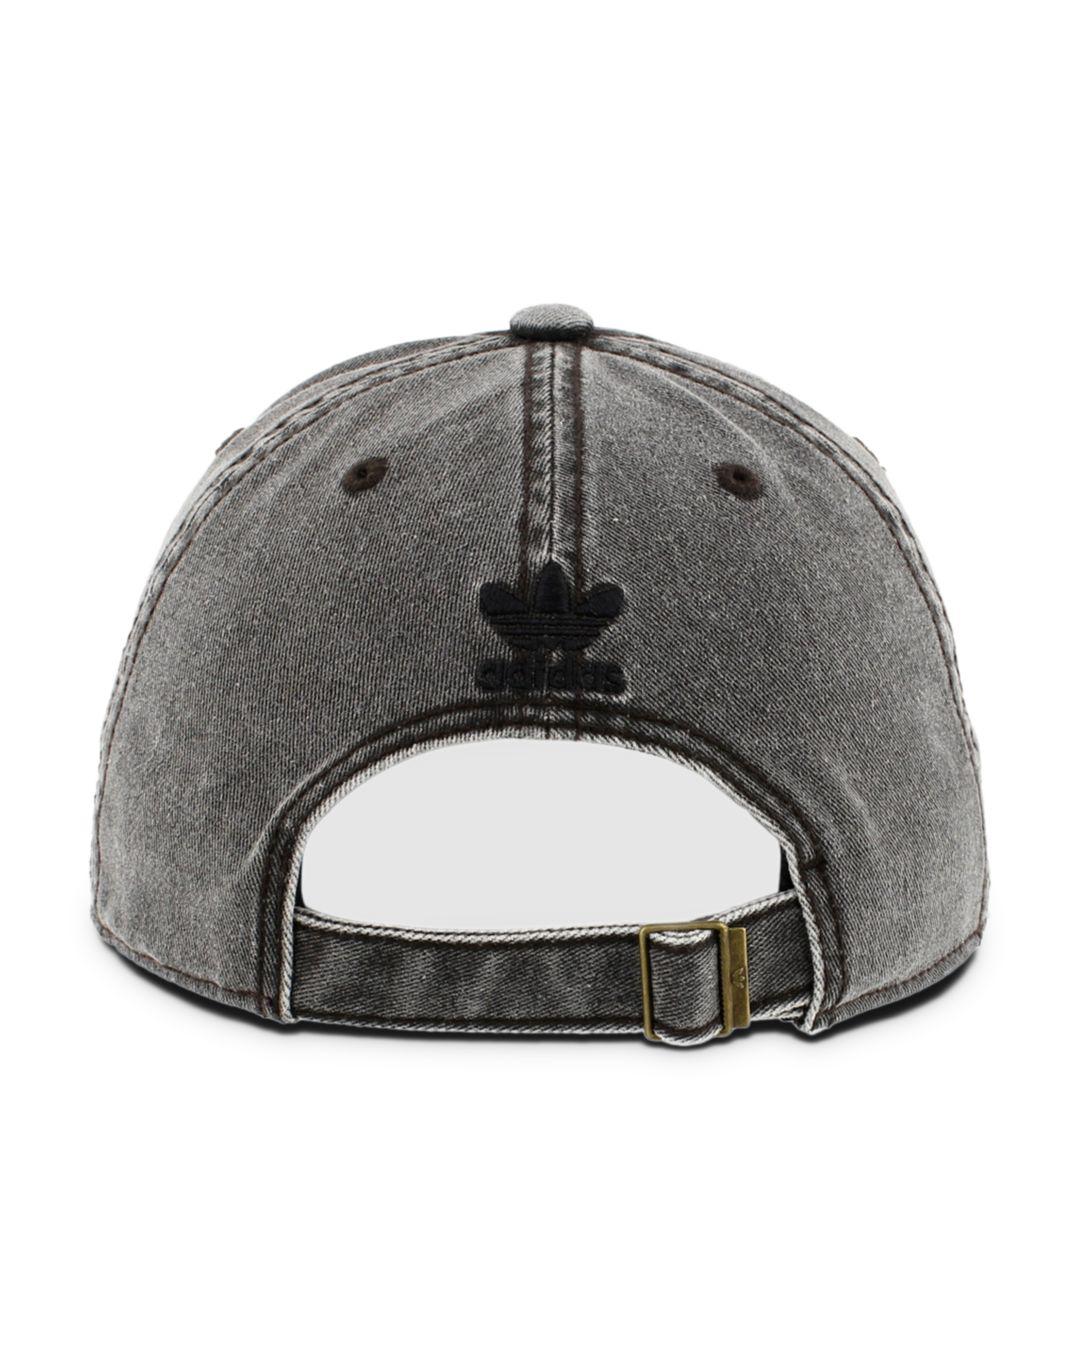 adidas Originals Denim Relaxed Hat in Charcoal (Grey) for Men | Lyst Canada